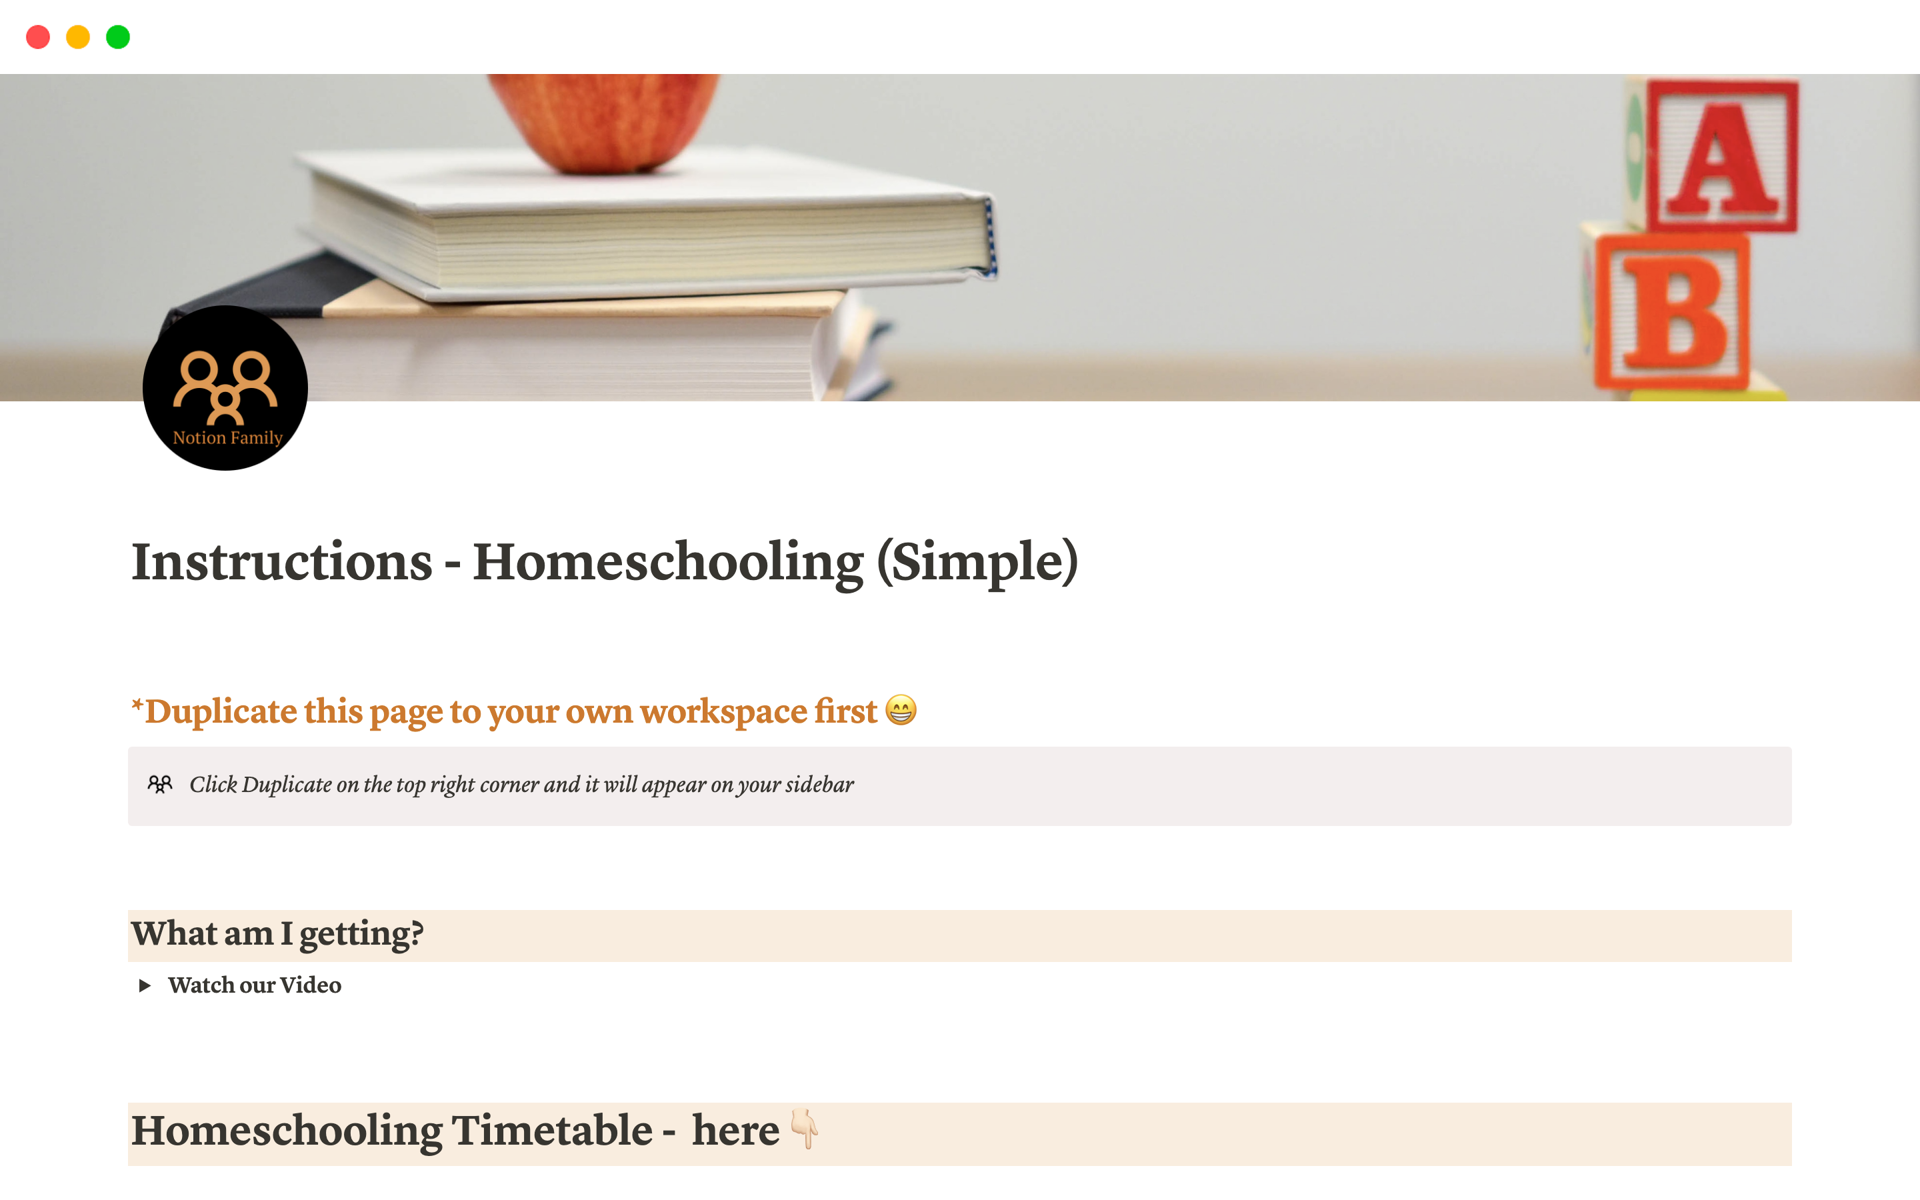 A simple homeschooling template designed for families on the move or those in lockdown. 